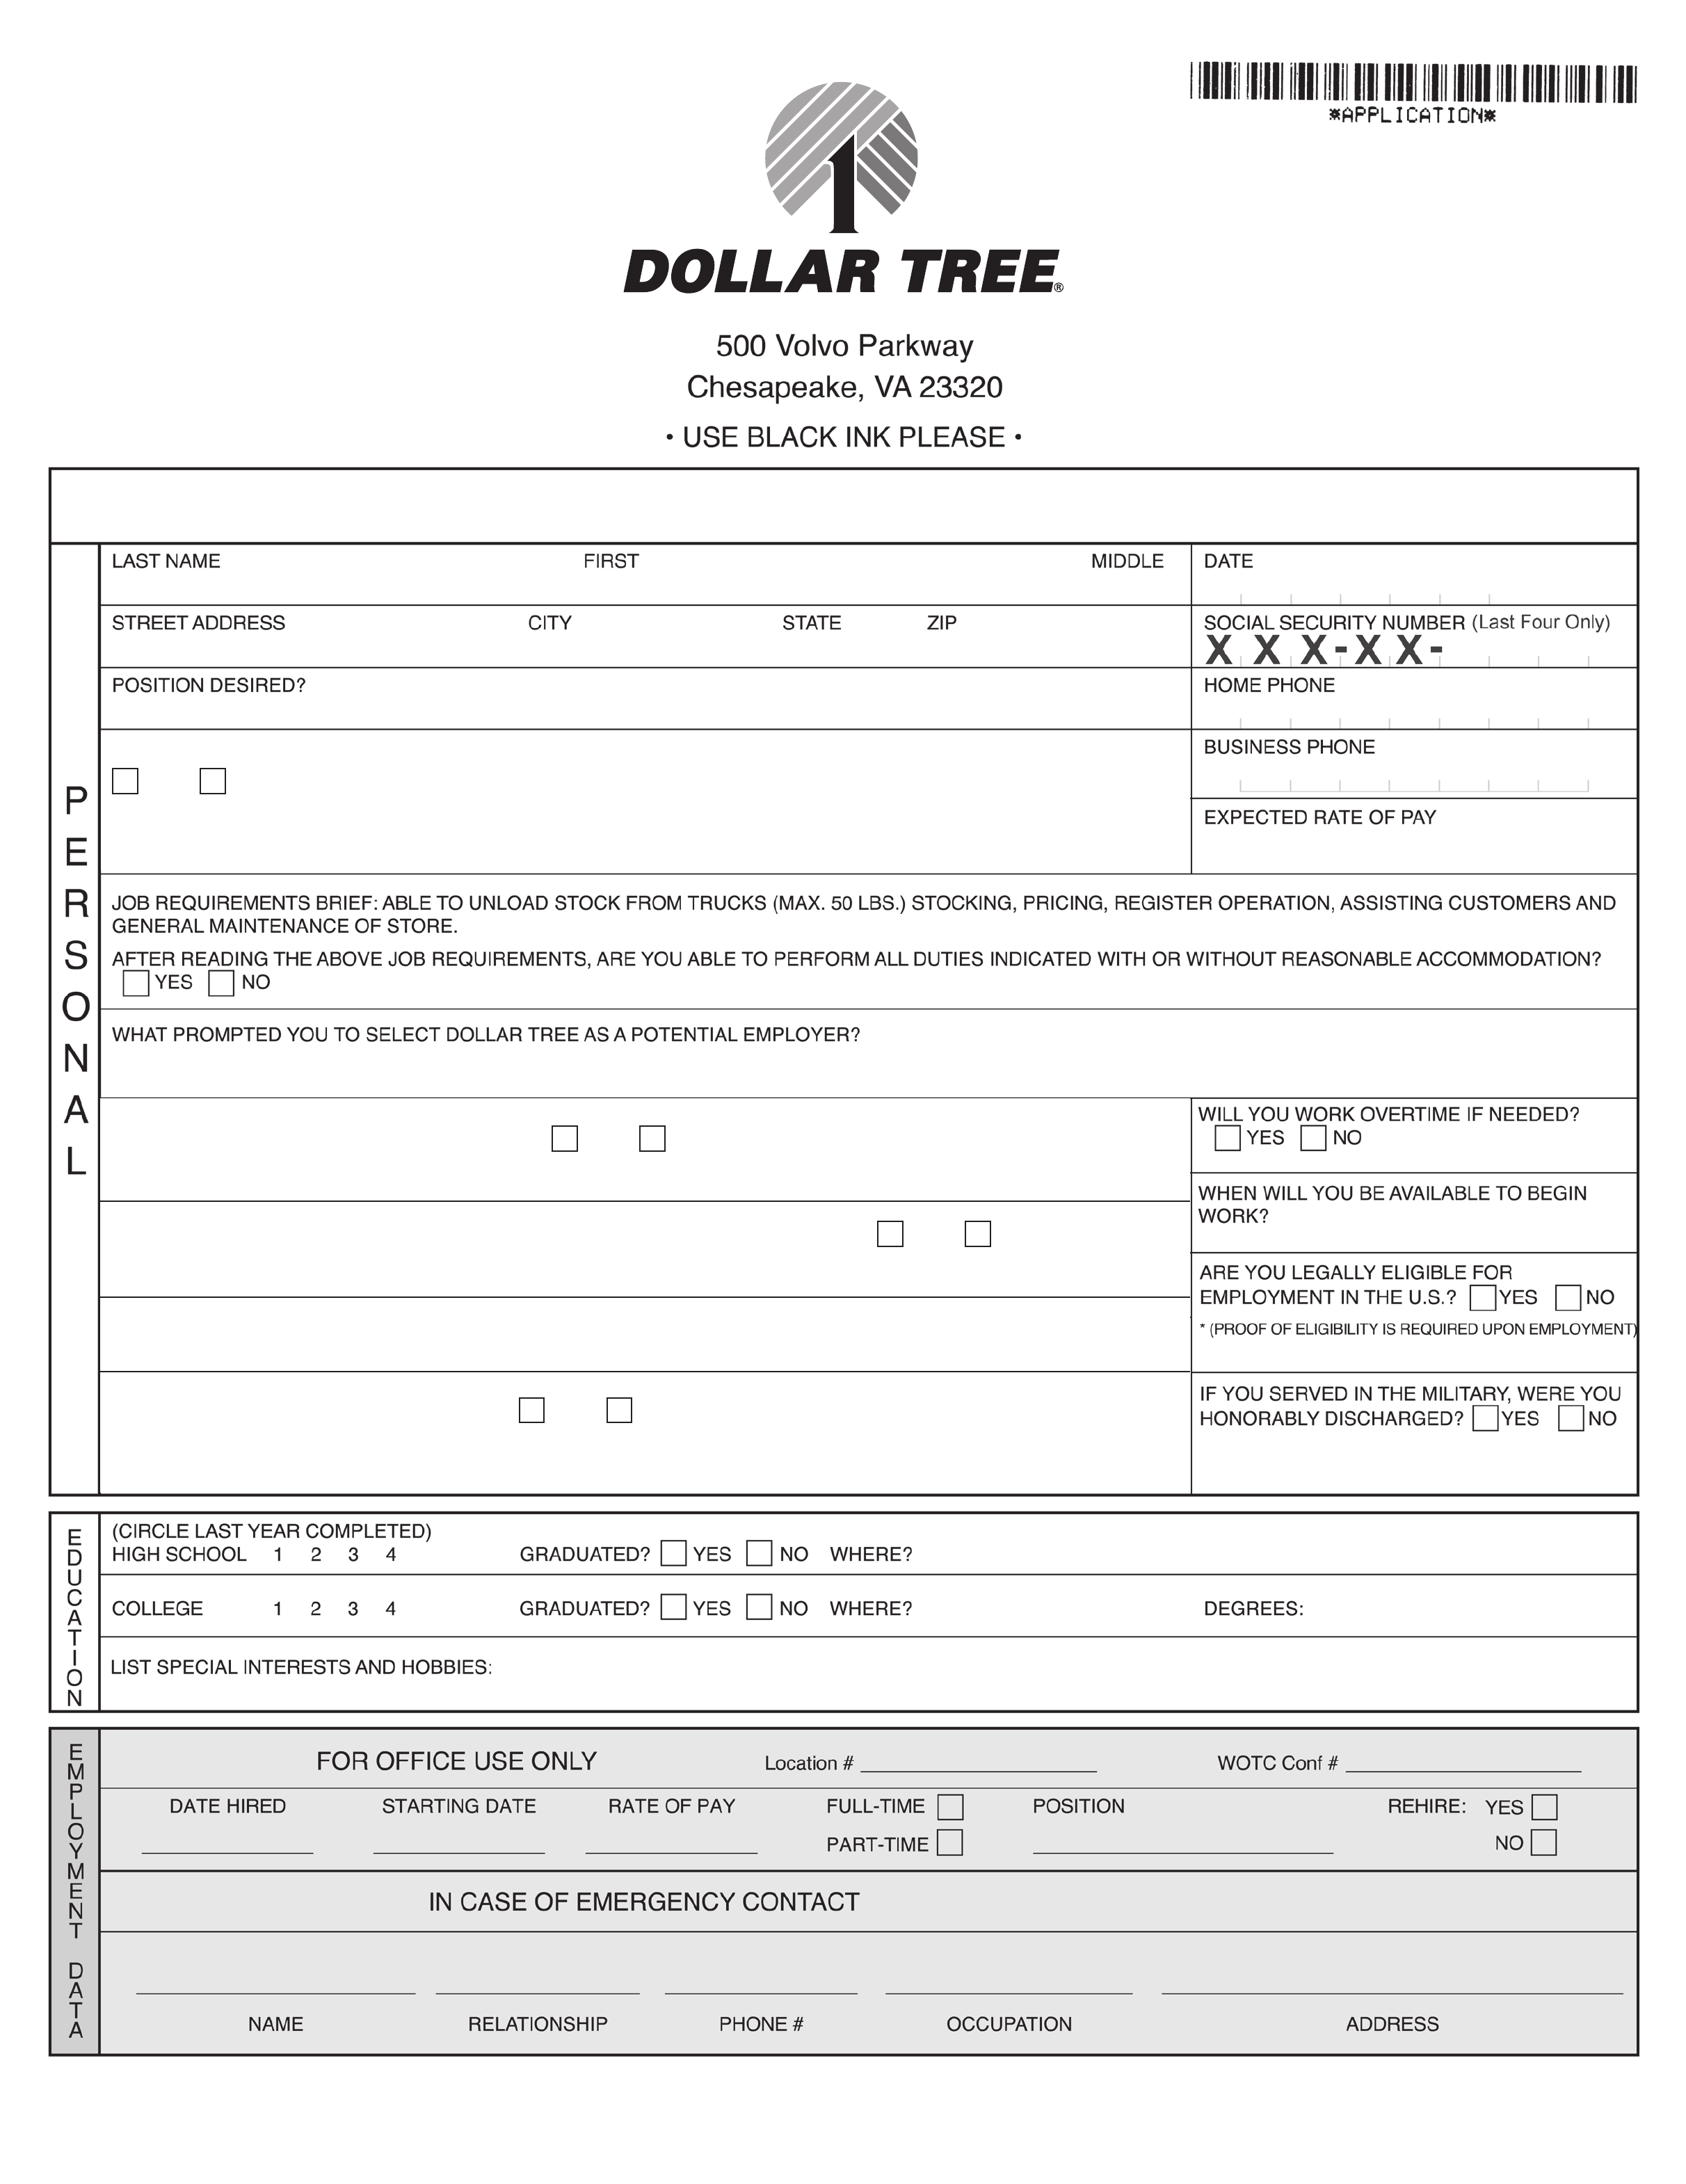 Dollar Tree Application For Employment Form Free Download